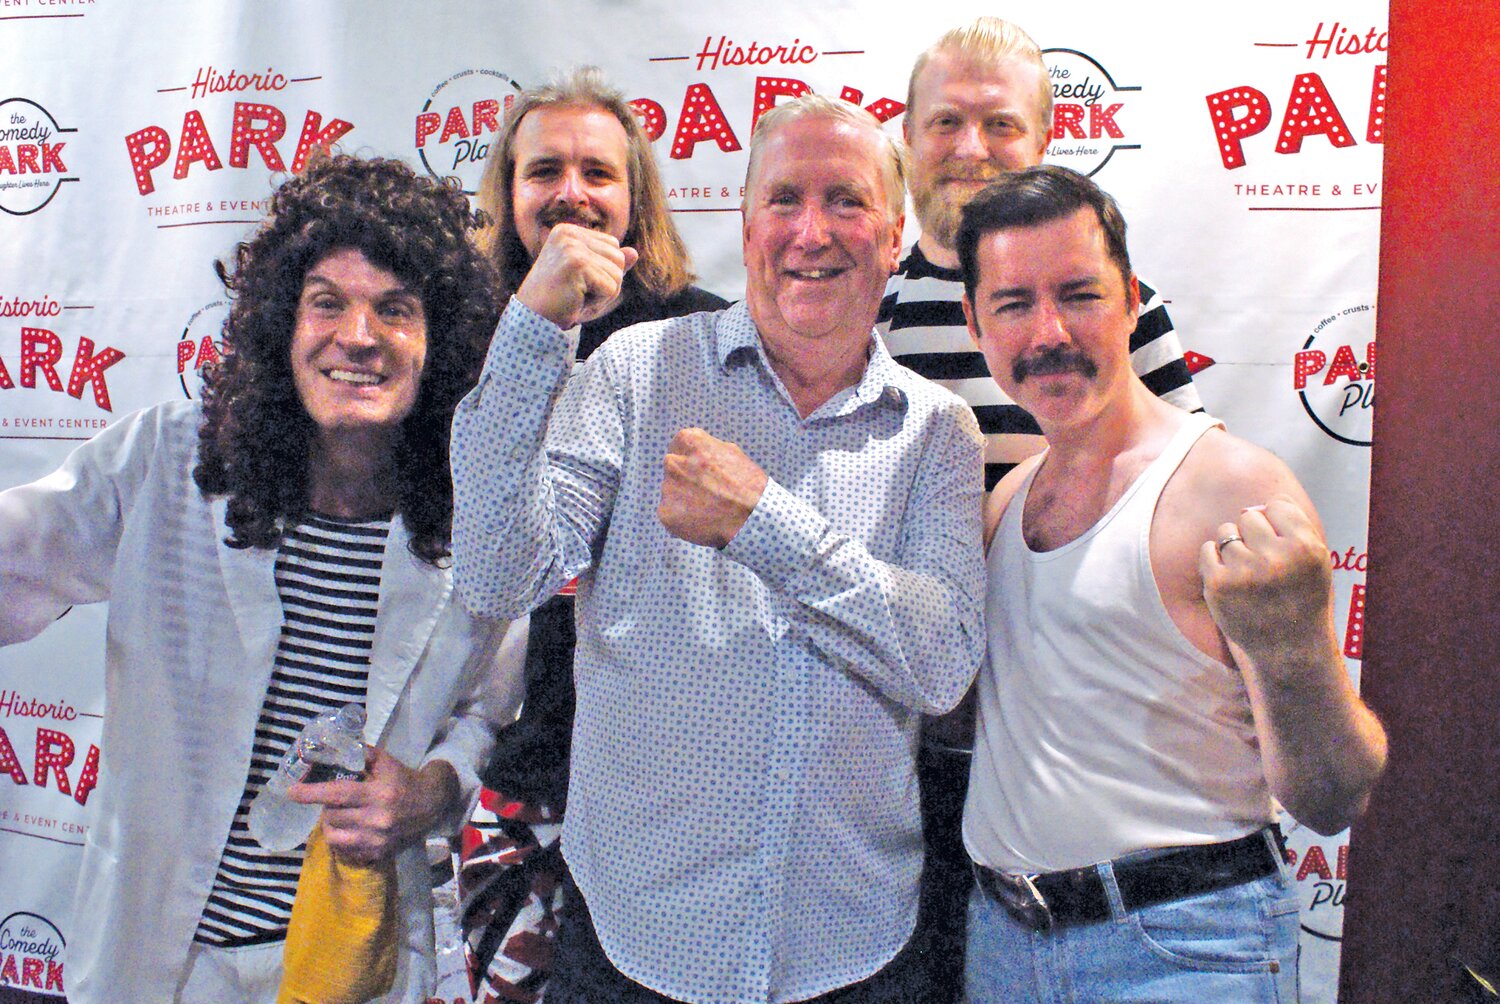 LONG LIVE YOUR MAJESTY: Members of the British band Majesty, a Queen cover band, stand with Mayor Ken Hopkins for a quick photo. Left to right: Guitarist Pete Southern, bass player Ronnie Holland, Mayor Hopkins, drummer Chris Carter and vocalist/keyboard player Rob Lea as Freddy Mercury.